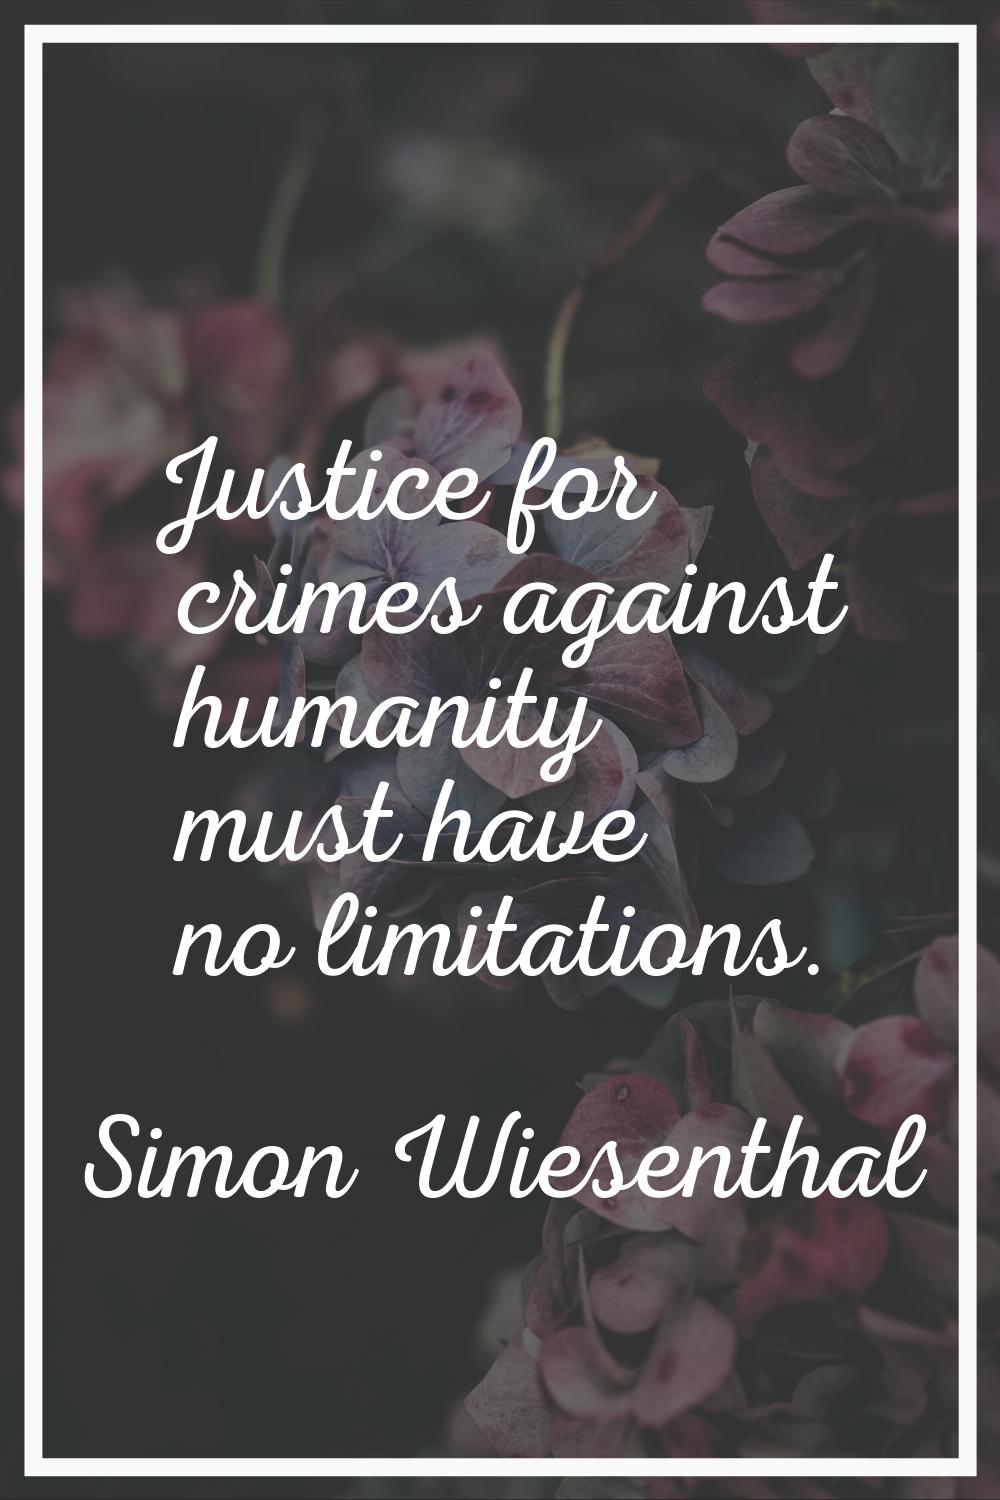 Justice for crimes against humanity must have no limitations.